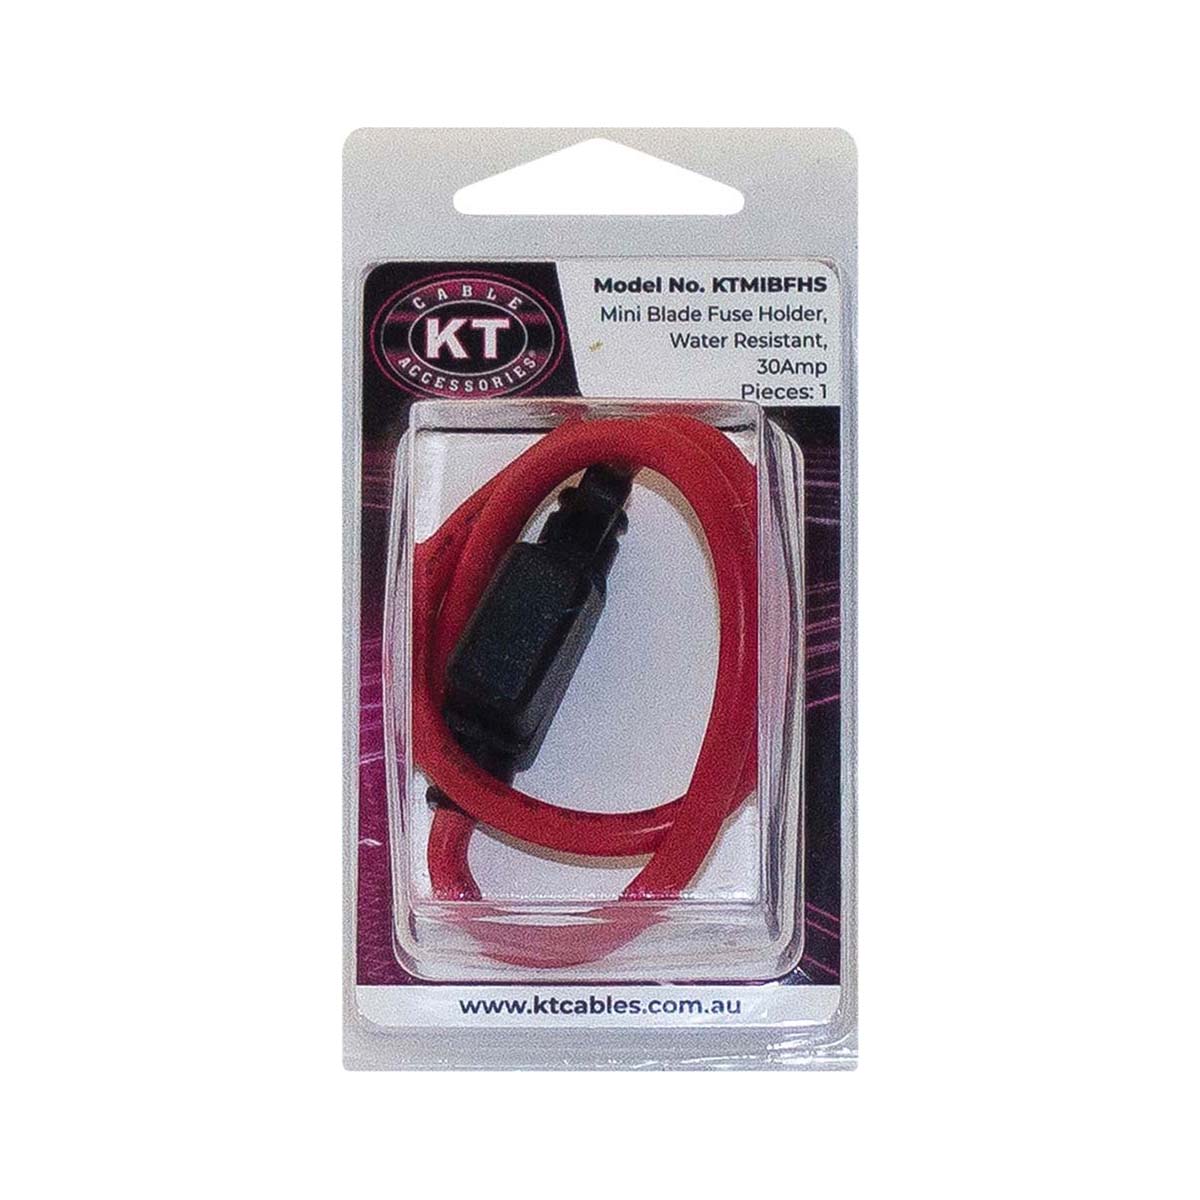 KT Cables Water Resistant Mini Blade Fuse Holder